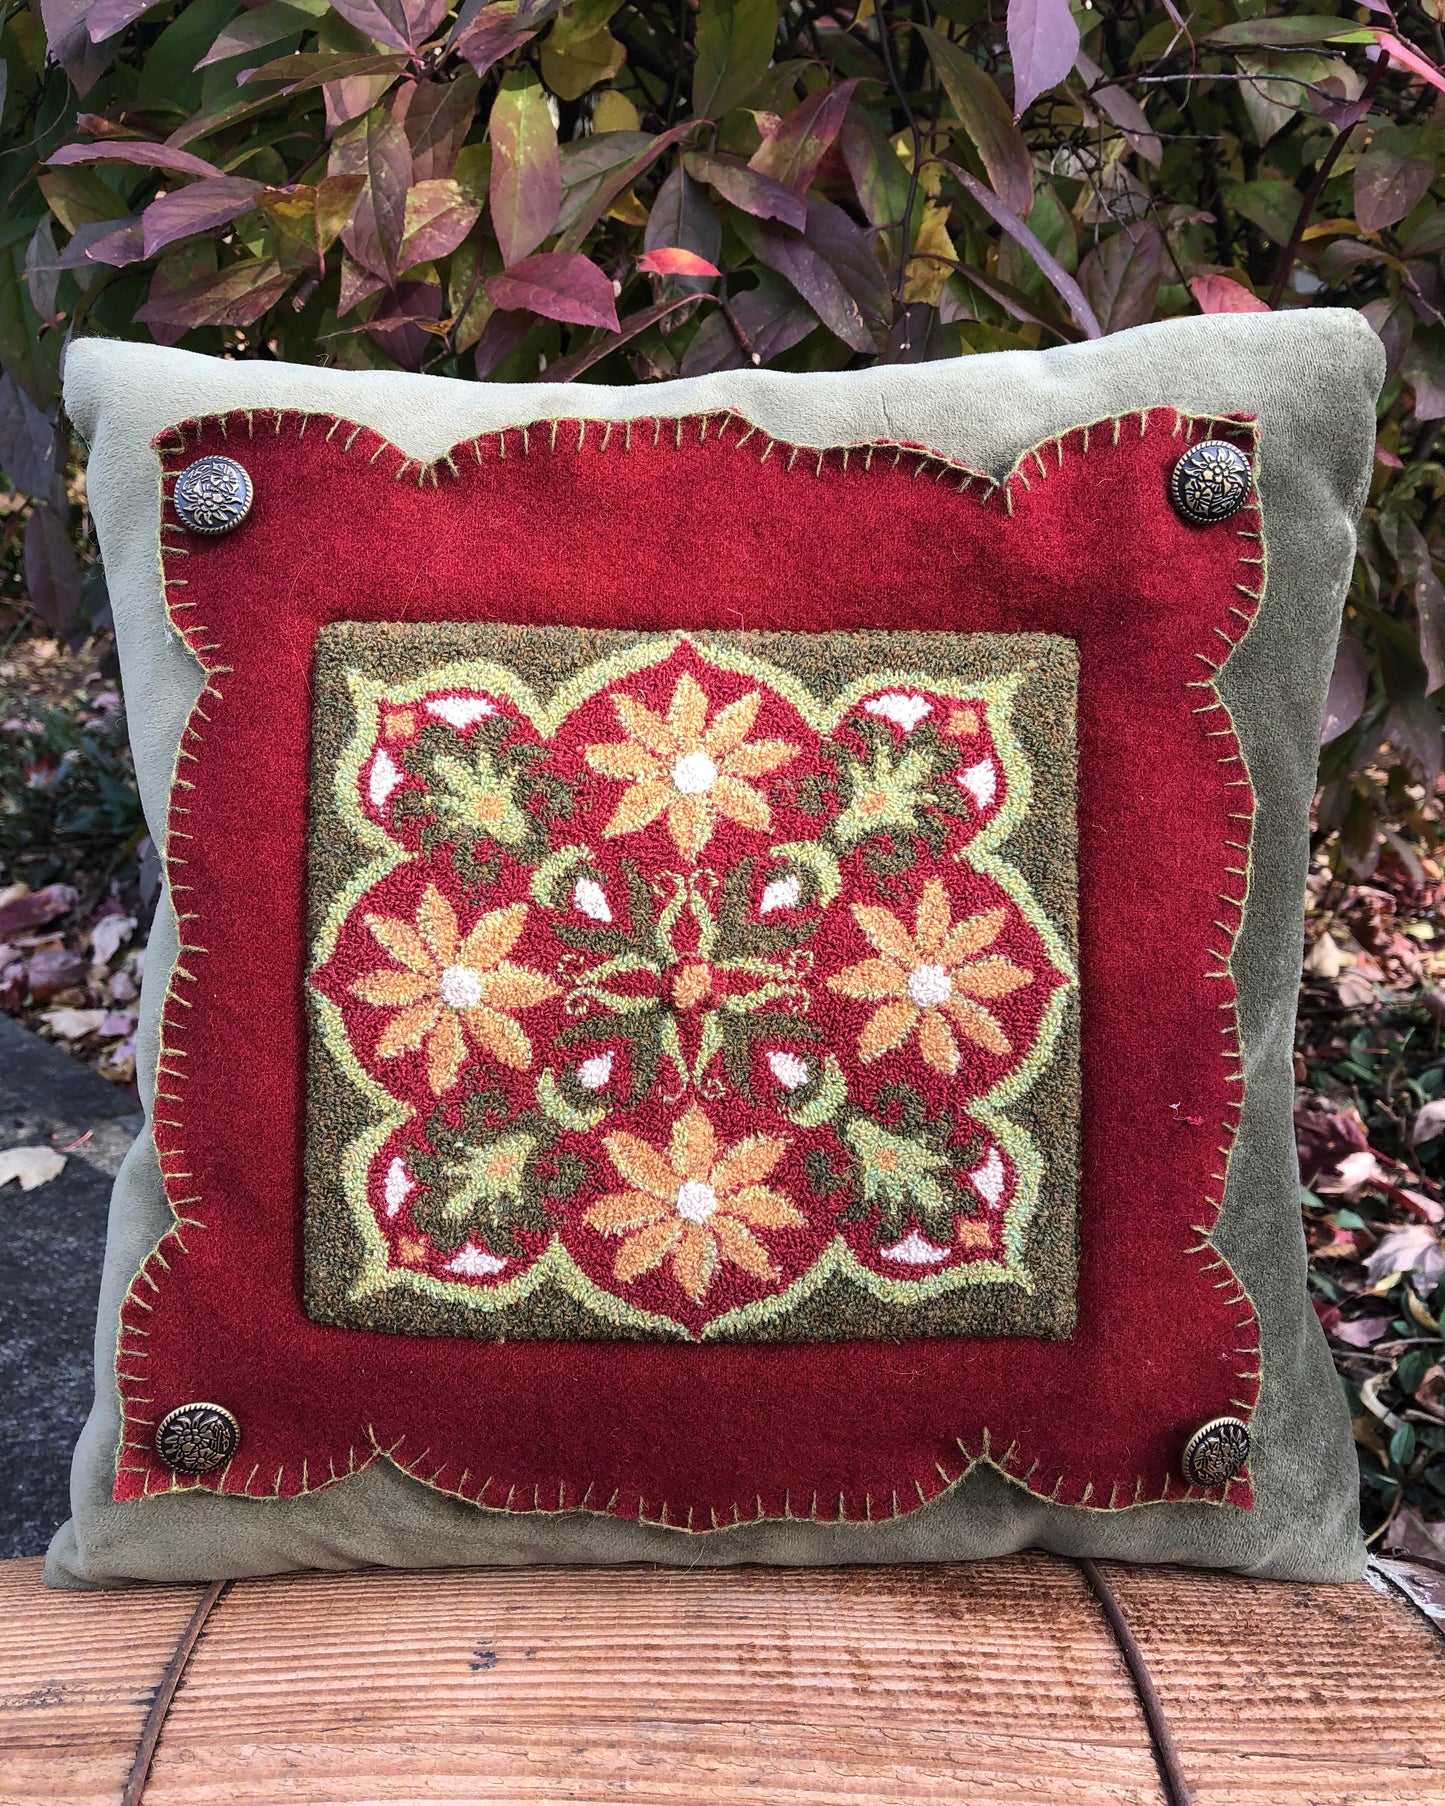 Serene- Punch Needle Pattern by Orphaned Wool . Patterns are available as Paper Punch Needle Patterns or Pattern on Weaver's Cloth Fabric. This is a lovely pattern to create a wall hanging or pillow design.